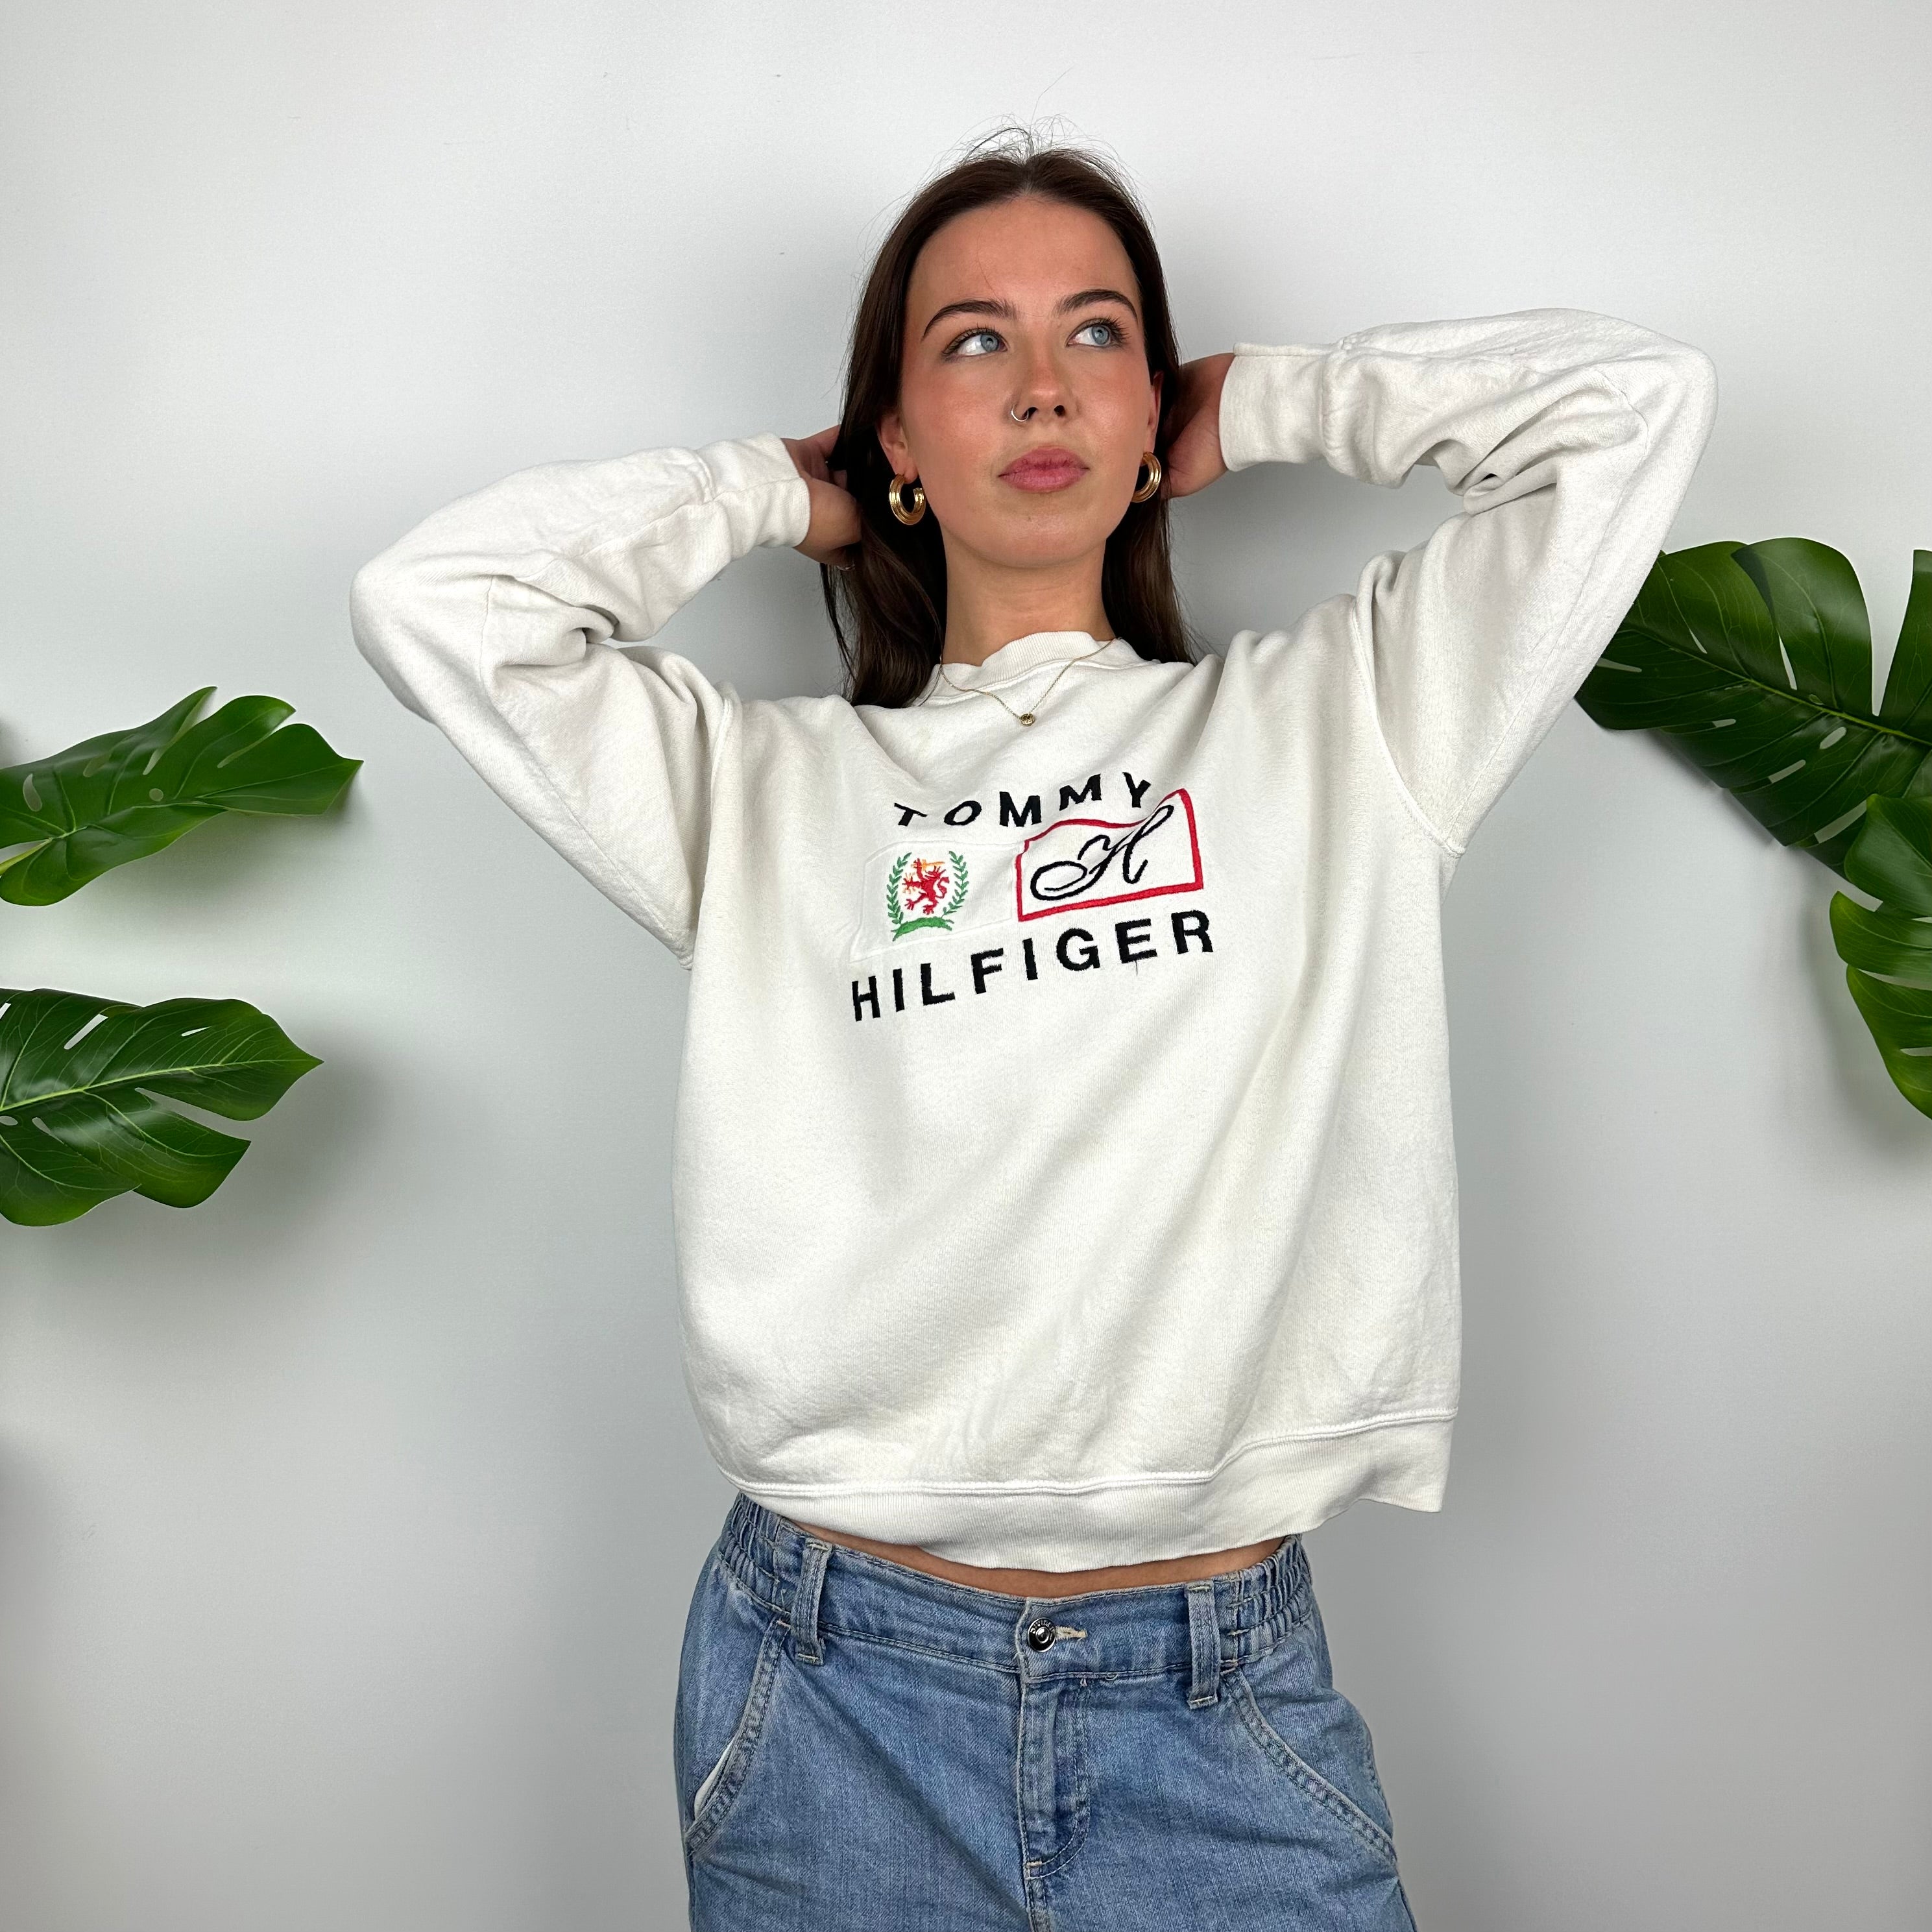 Tommy Hilfiger White Embroidered Spell Out Sweatshirt (M)